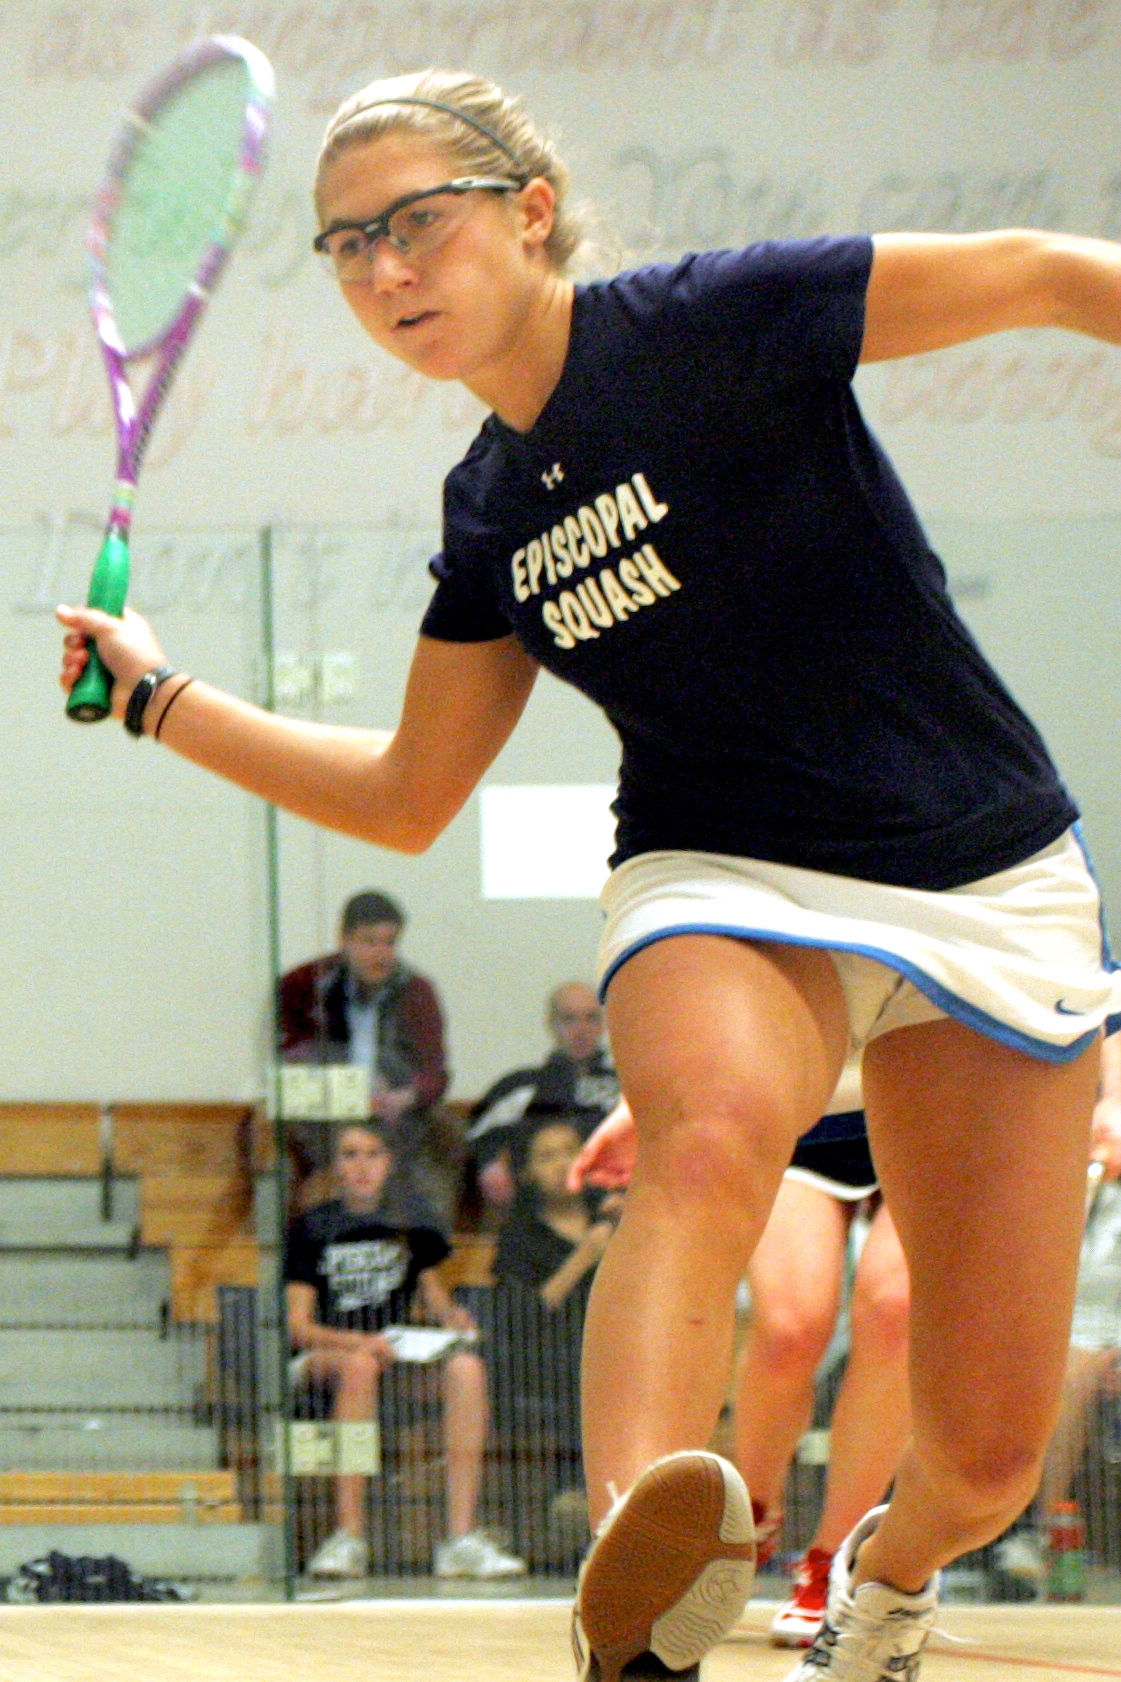 Elizabeth Eyre took the GU17 without the loss of a game, including a 11-9, 11.5, 11-9, final over Haley Mendez.